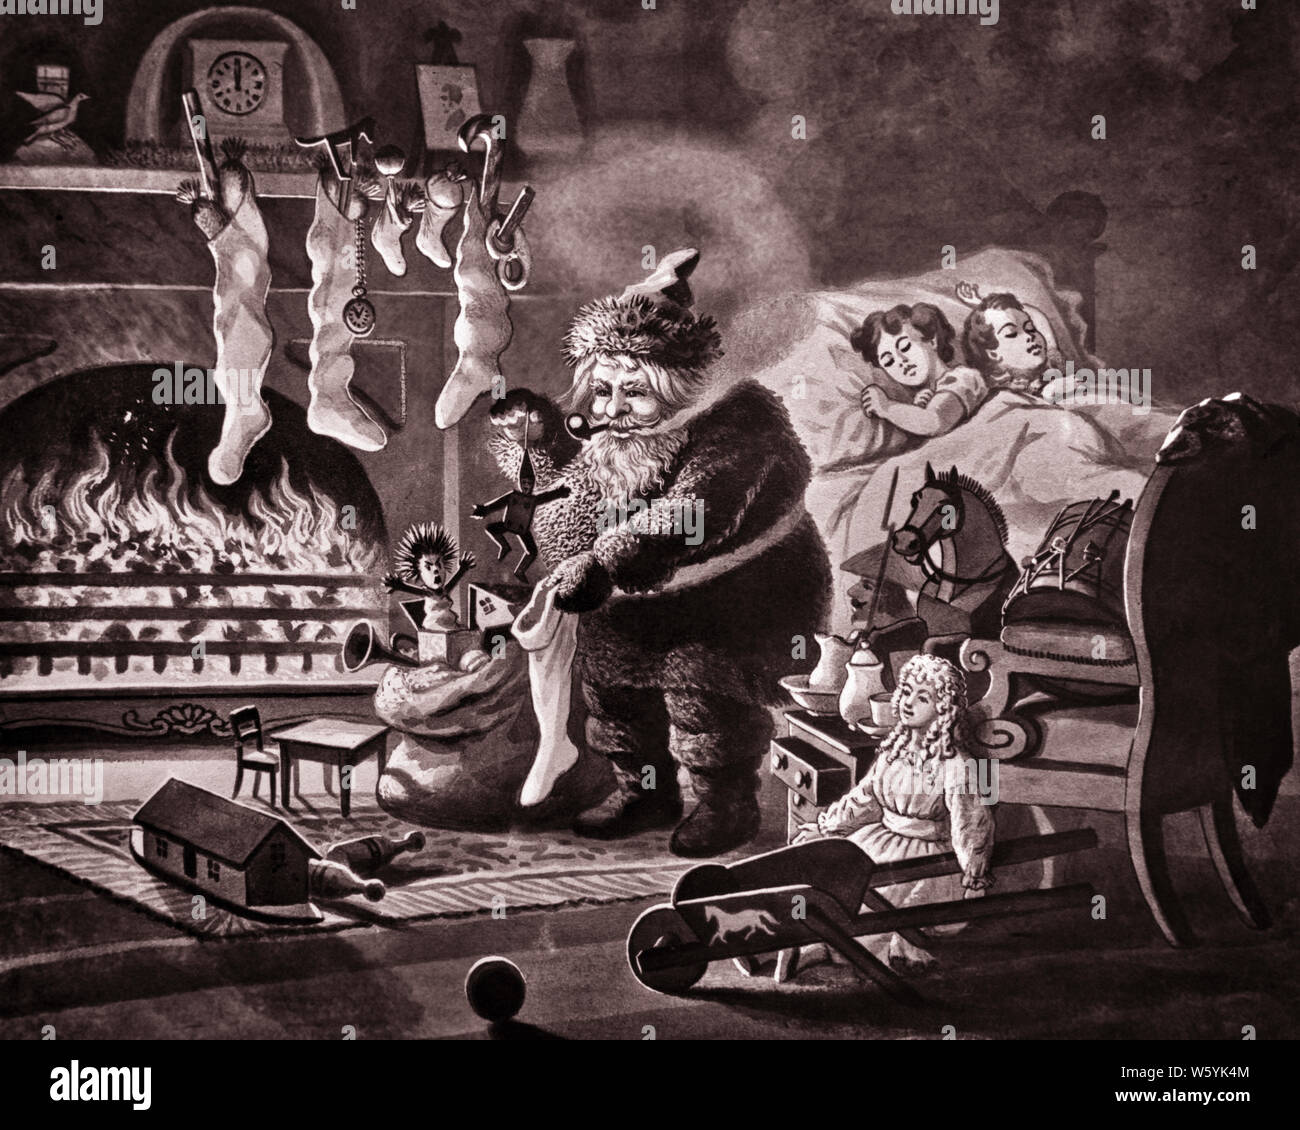 1880s SANTA SMOKING HIS PIPE BY FIREPLACE FILLING CHRISTMAS STOCKINGS HUNG BY THE CHIMNEY WITH CARE AS CHILDREN ARE FAST ASLEEP - a5955 SPL001 HARS BROTHER OLD FASHION SISTER BEARD 1 JUVENILE MYSTERY JOY LIFESTYLE FEMALES BROTHERS PIPE CLAUS HOME LIFE HALF-LENGTH PERSONS INSPIRATION CUTOUT MALES SIBLINGS CONFIDENCE SENIOR MAN GIFTS SISTERS SAINT B&W HAPPINESS FILLING HIS STRENGTH MERRY AND SANTA CLAUS ARE AS BY SIBLING DECEMBER CONCEPTUAL DECEMBER 25 1880s IMAGINATION KRIS KRINGLE ST. NICK CREATIVITY FATHER CHRISTMAS HUNG JOLLY JOYOUS JUVENILES NICHOLAS BLACK AND WHITE HUN OLD FASHIONED Stock Photo